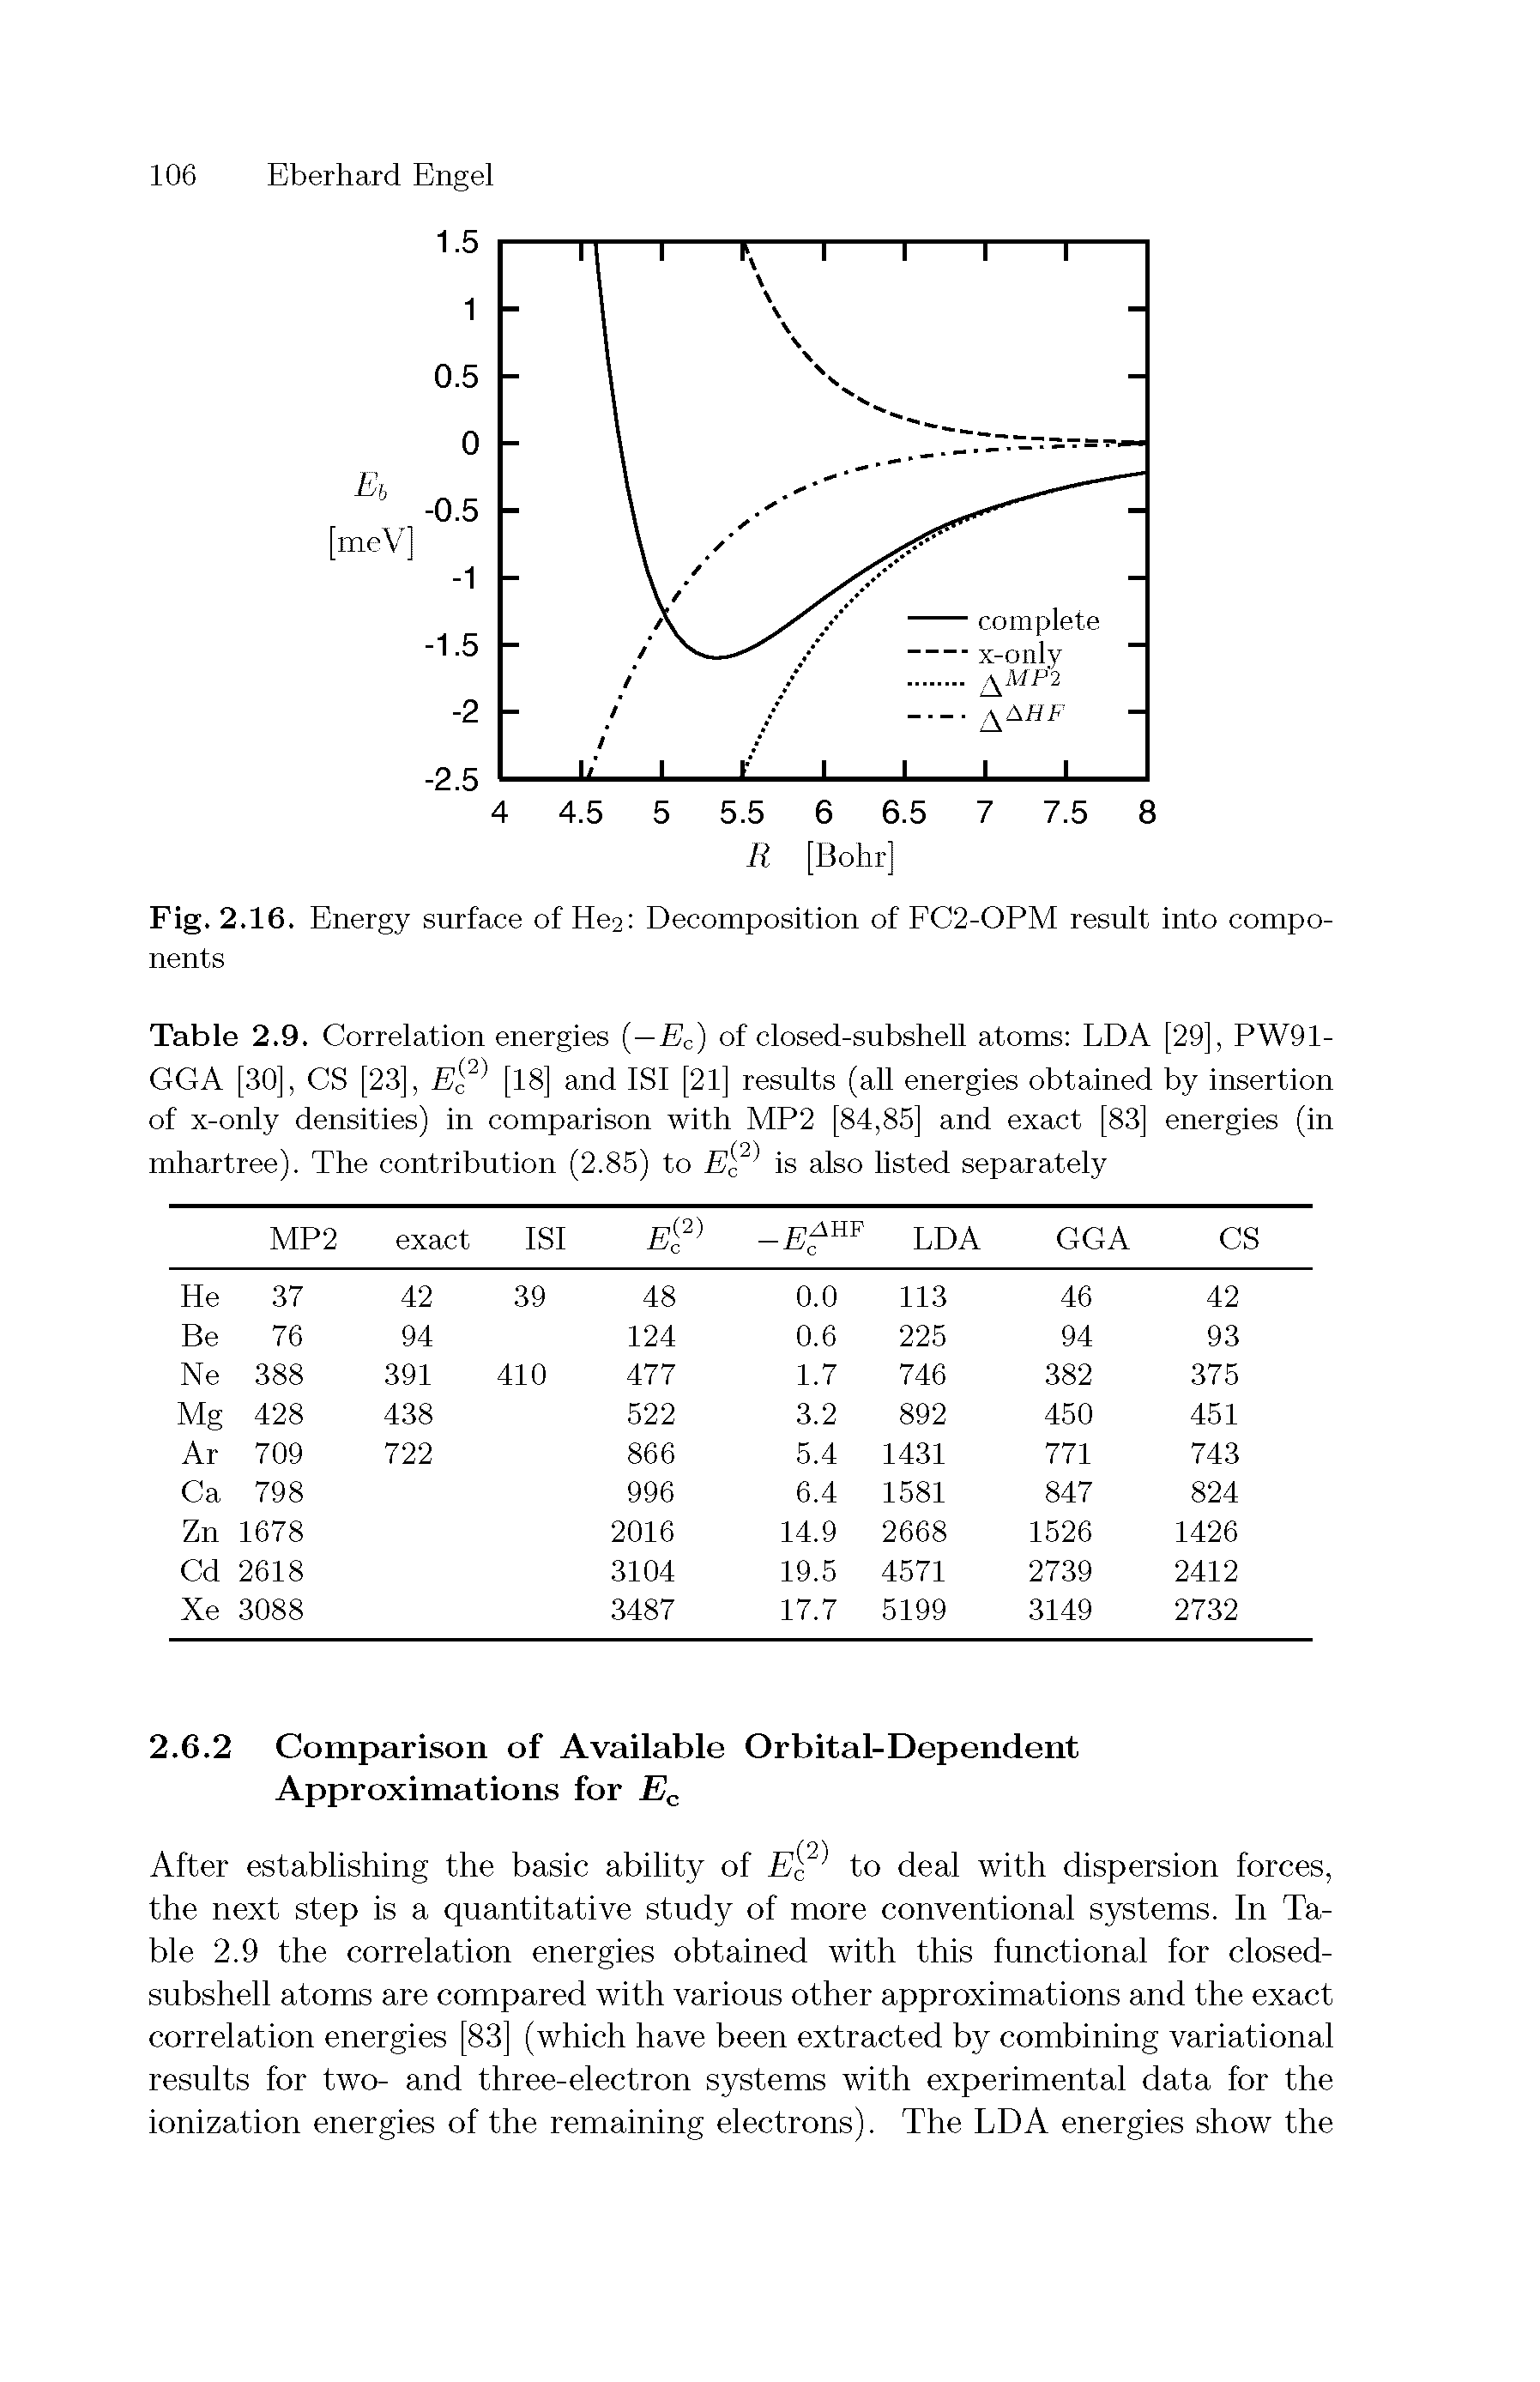 Table 2.9. Correlation energies —Ec) of closed-subshell atoms EDA [29], PW91-GGA [30], CS [23], e [18] and ISl [21] results (all energies obtained by insertion of x-only densities) in comparison with MP2 [84,85] and exact [83] energies (in mhartree). The contribution (2.85) to E is also listed separately...